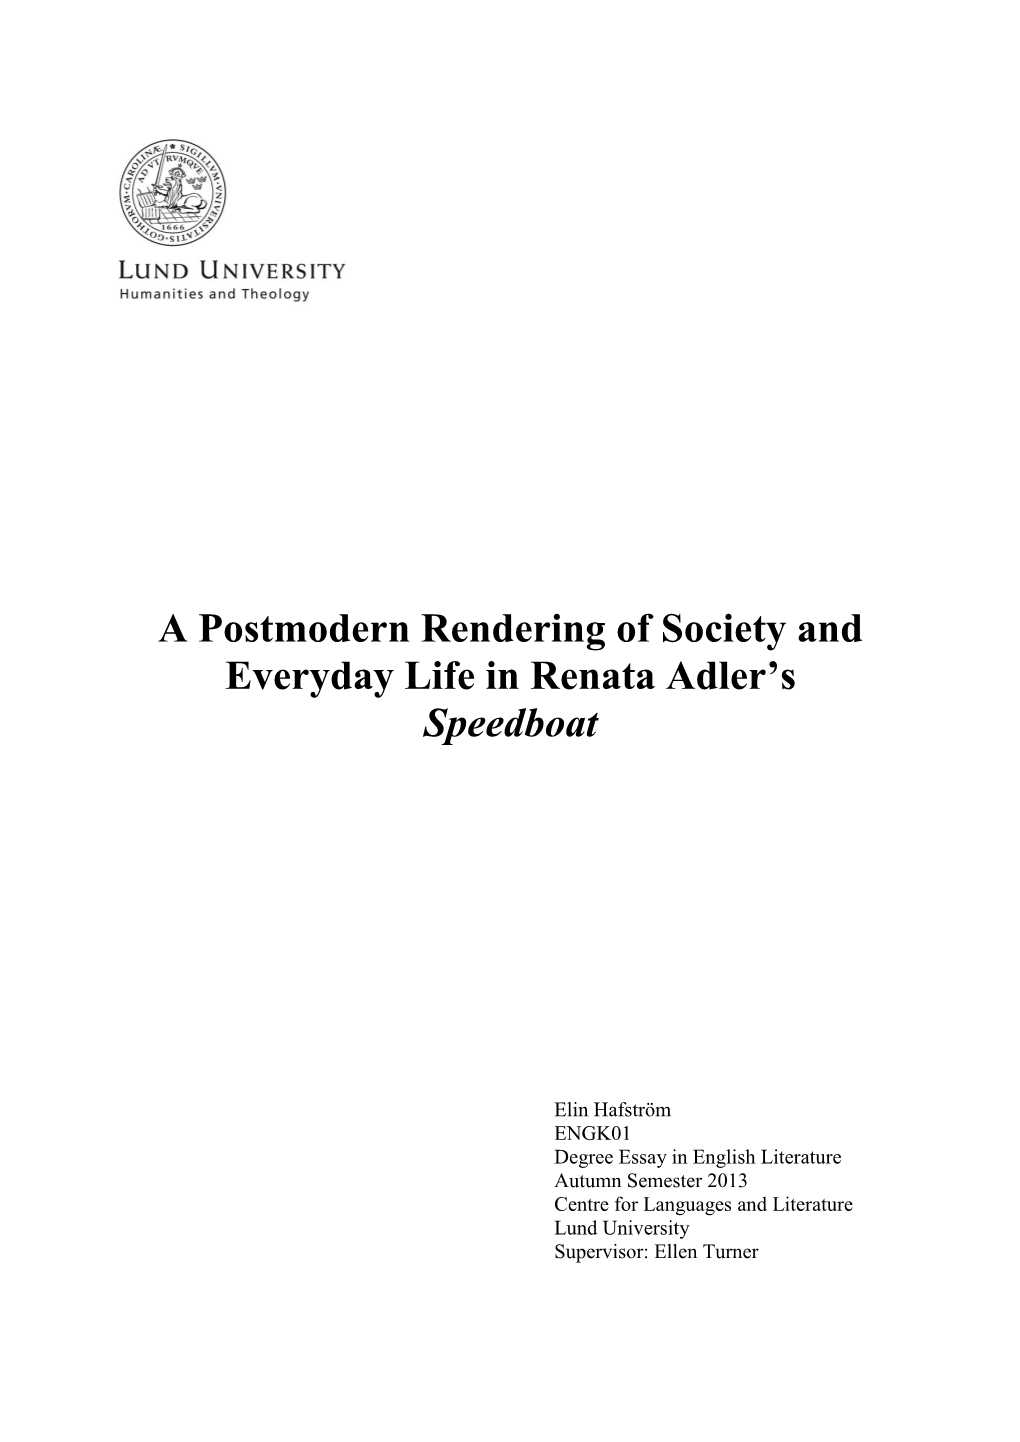 A Postmodern Rendering of Society and Everyday Life in Renata Adler's